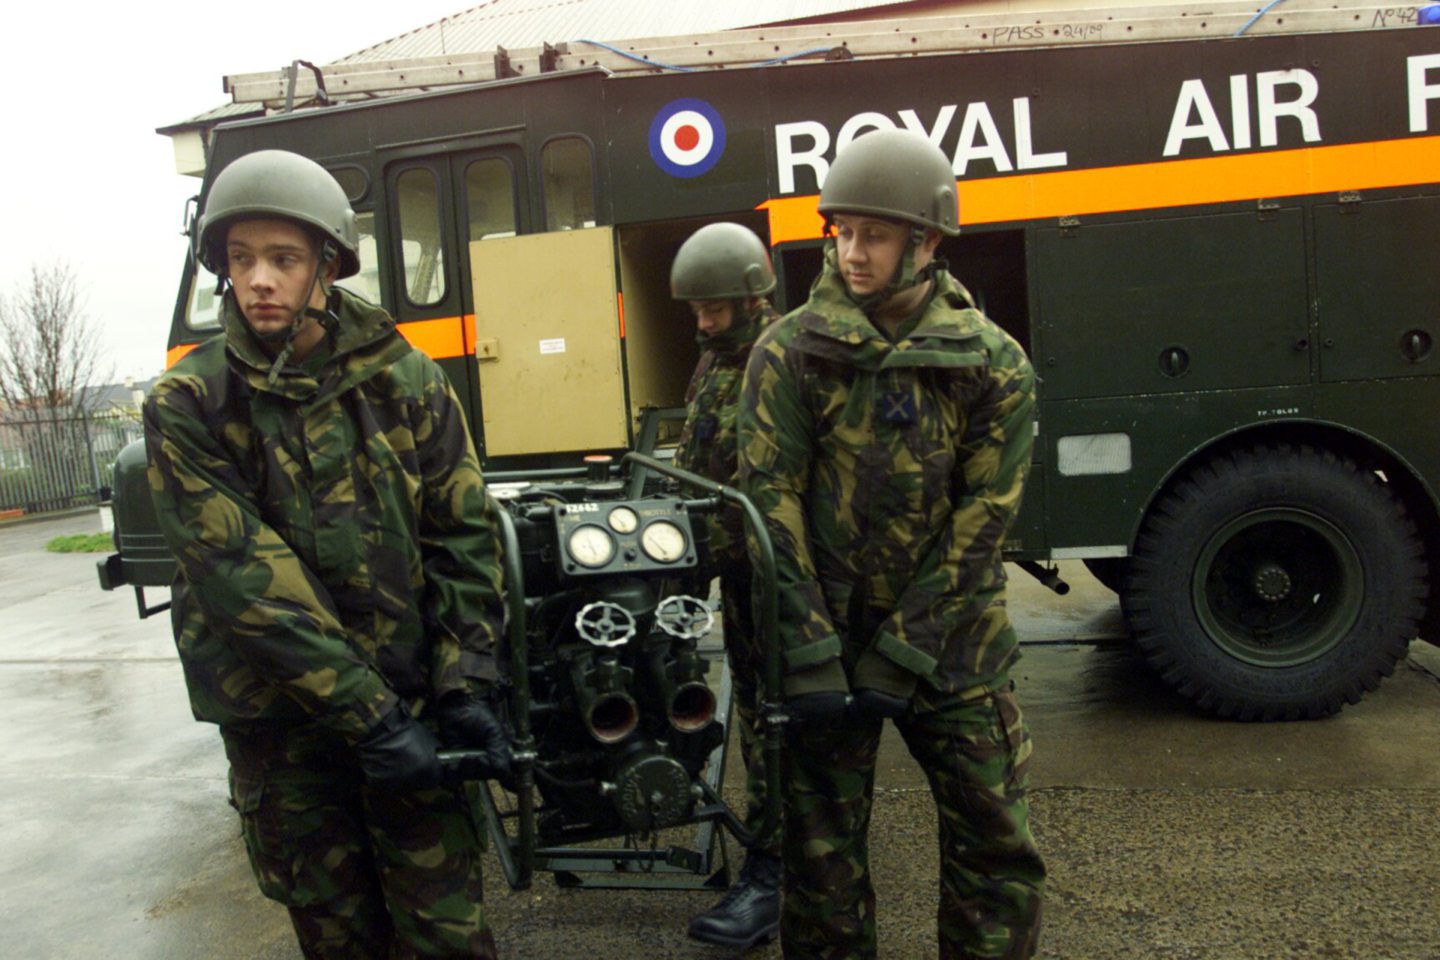 RAF personnel from Leuchars manning the pumps of the Arbroath Green Goddess in 2002.